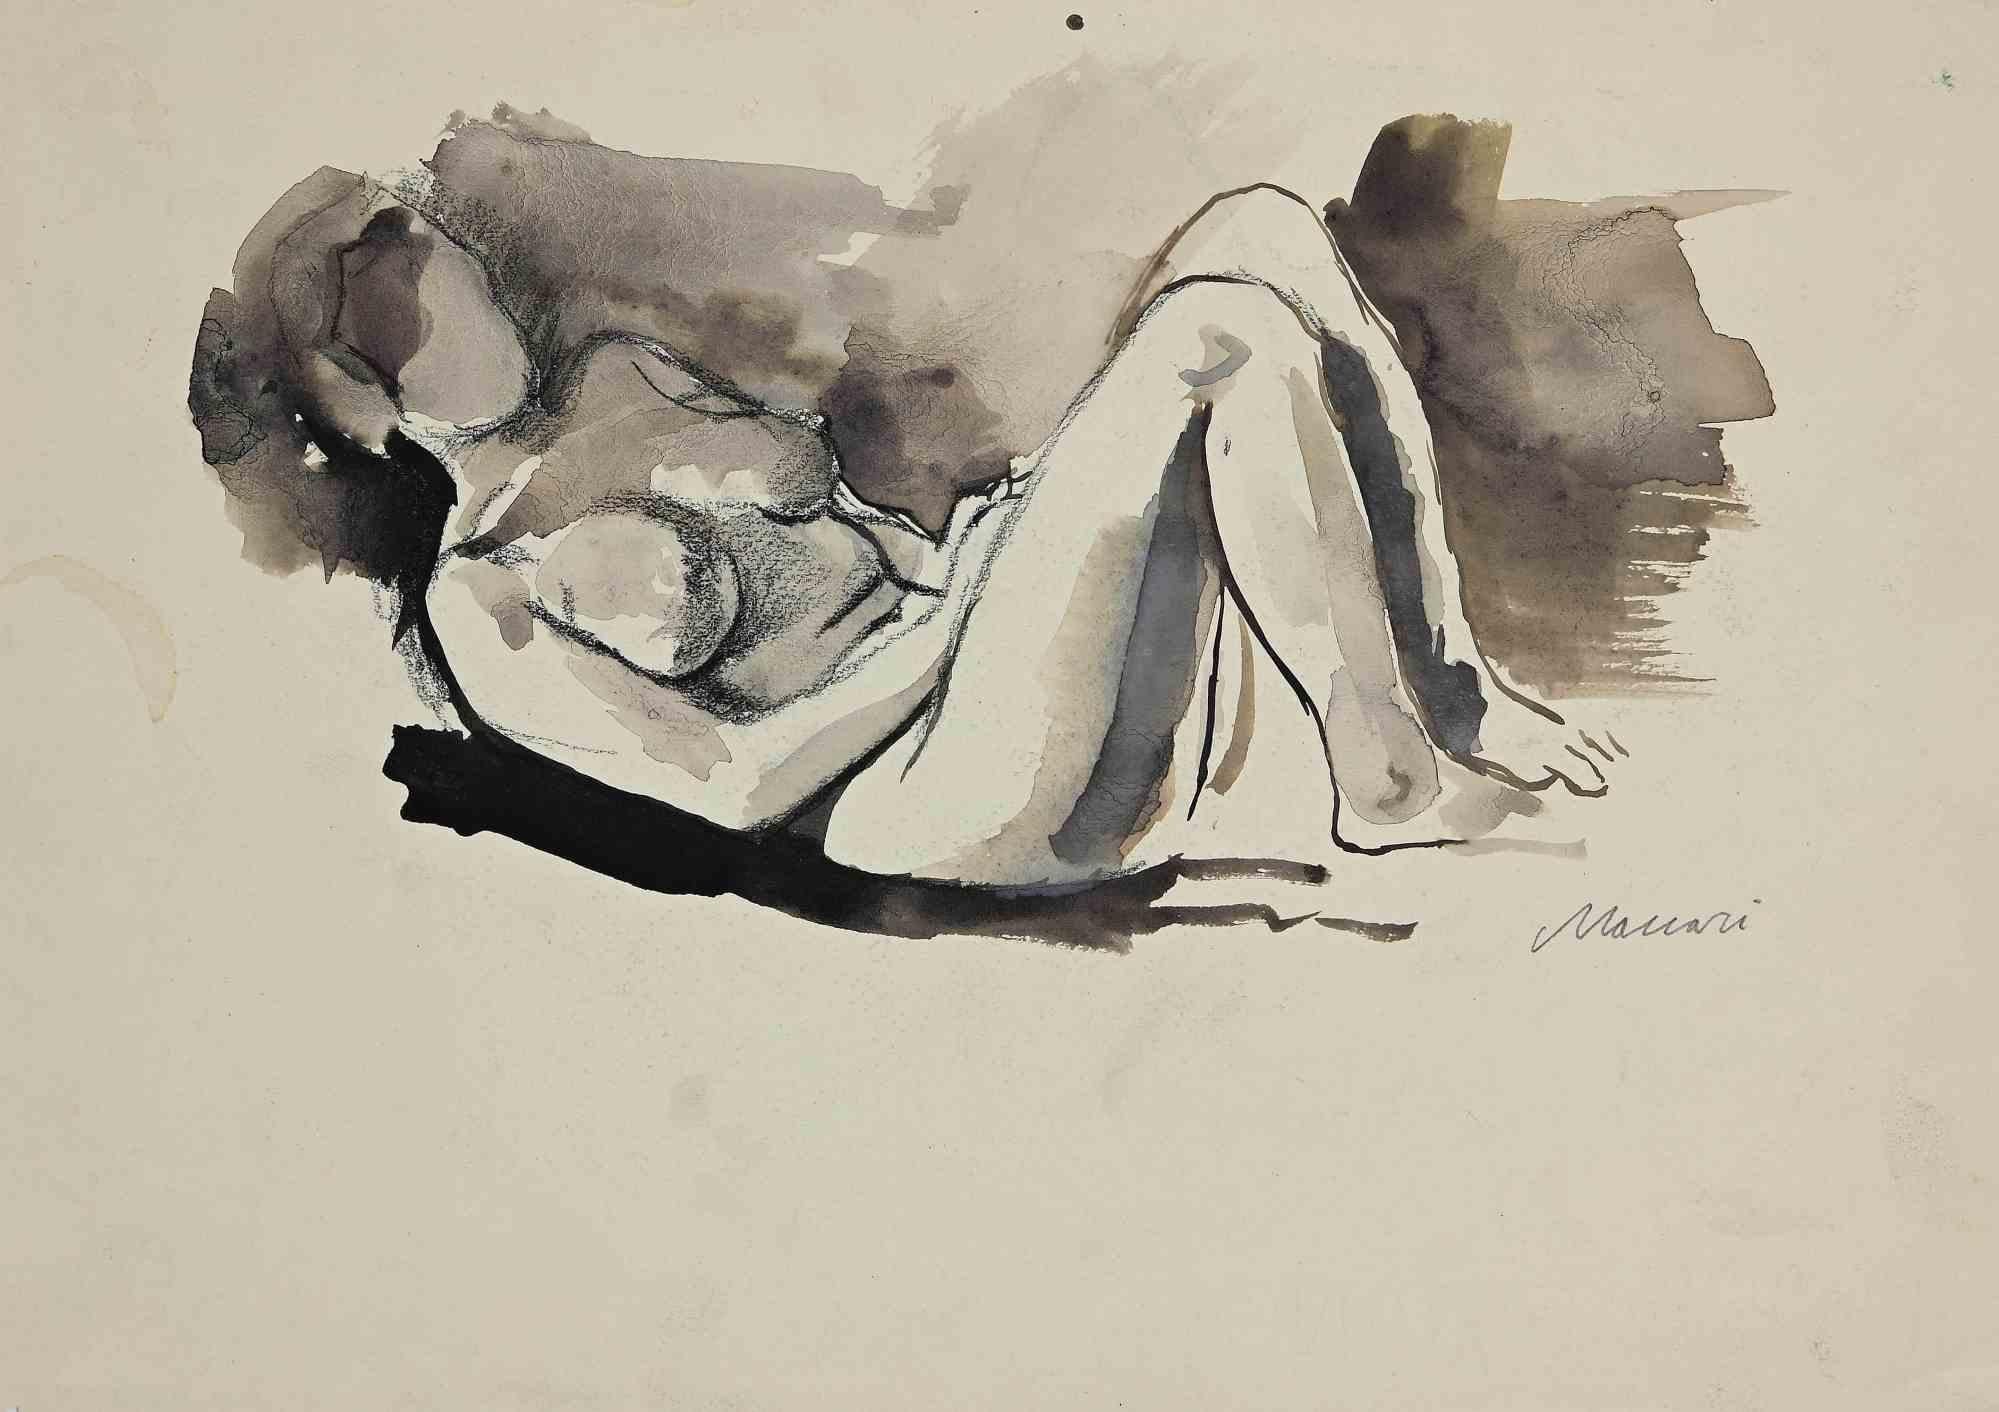 Reclined Nude is an original China Ink Drawing and Watercolour realized by Mino Maccari in mid-20th century.

Good condition on a yellowed paper.

Hand-signed by the artist with pencil.

Mino Maccari (1898-1989) was an Italian writer, painter,